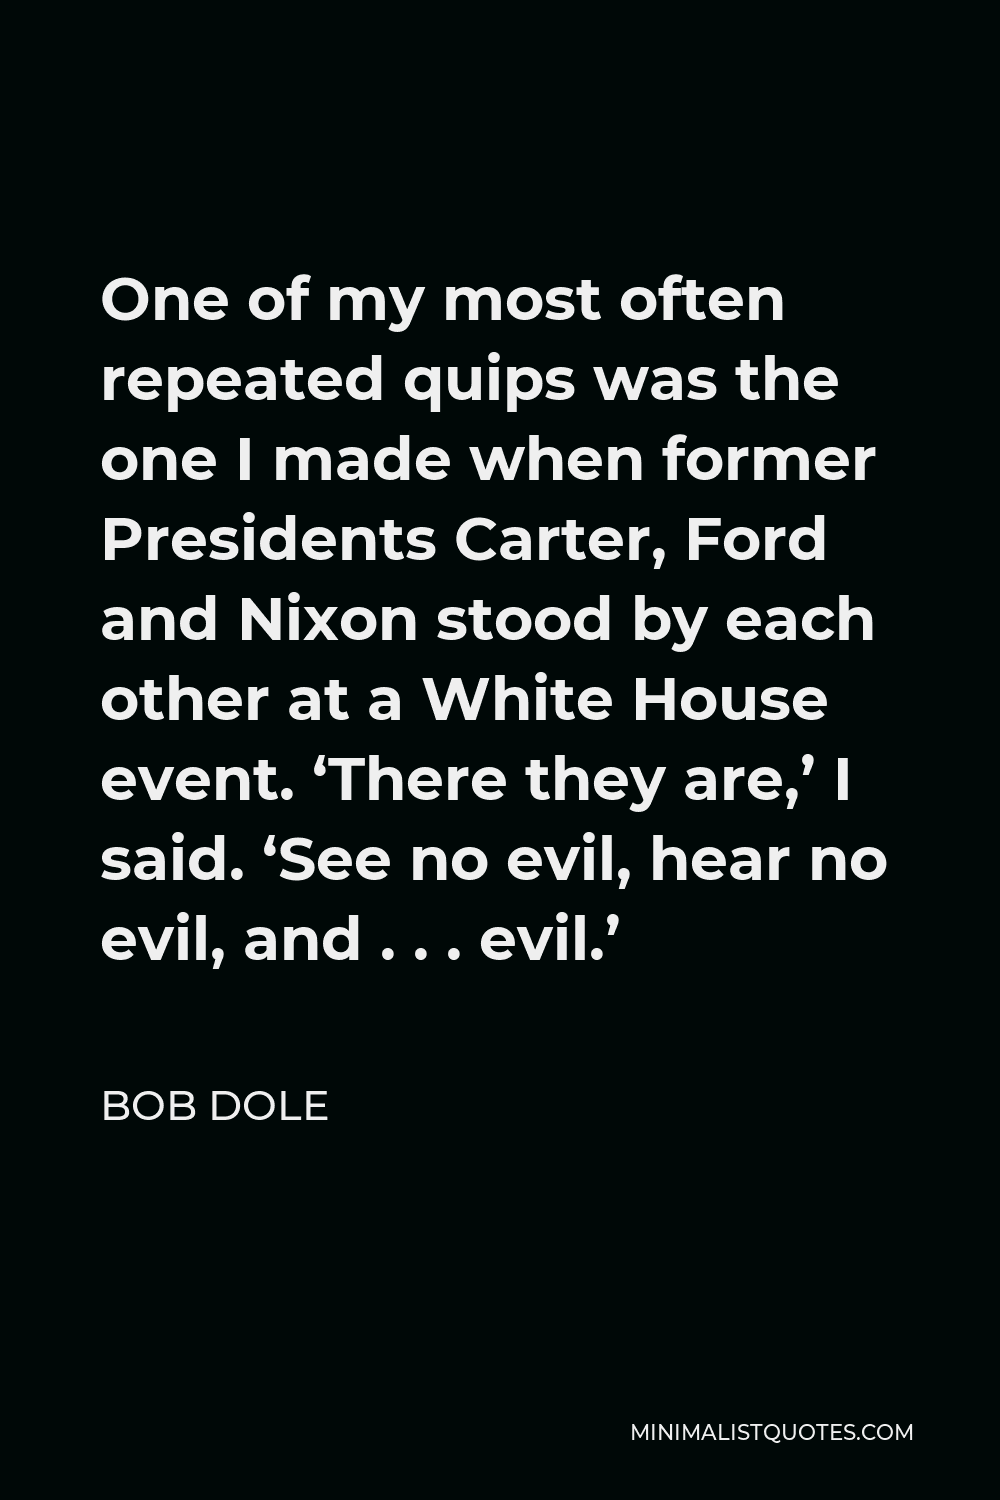 Bob Dole Quote - One of my most often repeated quips was the one I made when former Presidents Carter, Ford and Nixon stood by each other at a White House event. ‘There they are,’ I said. ‘See no evil, hear no evil, and . . . evil.’